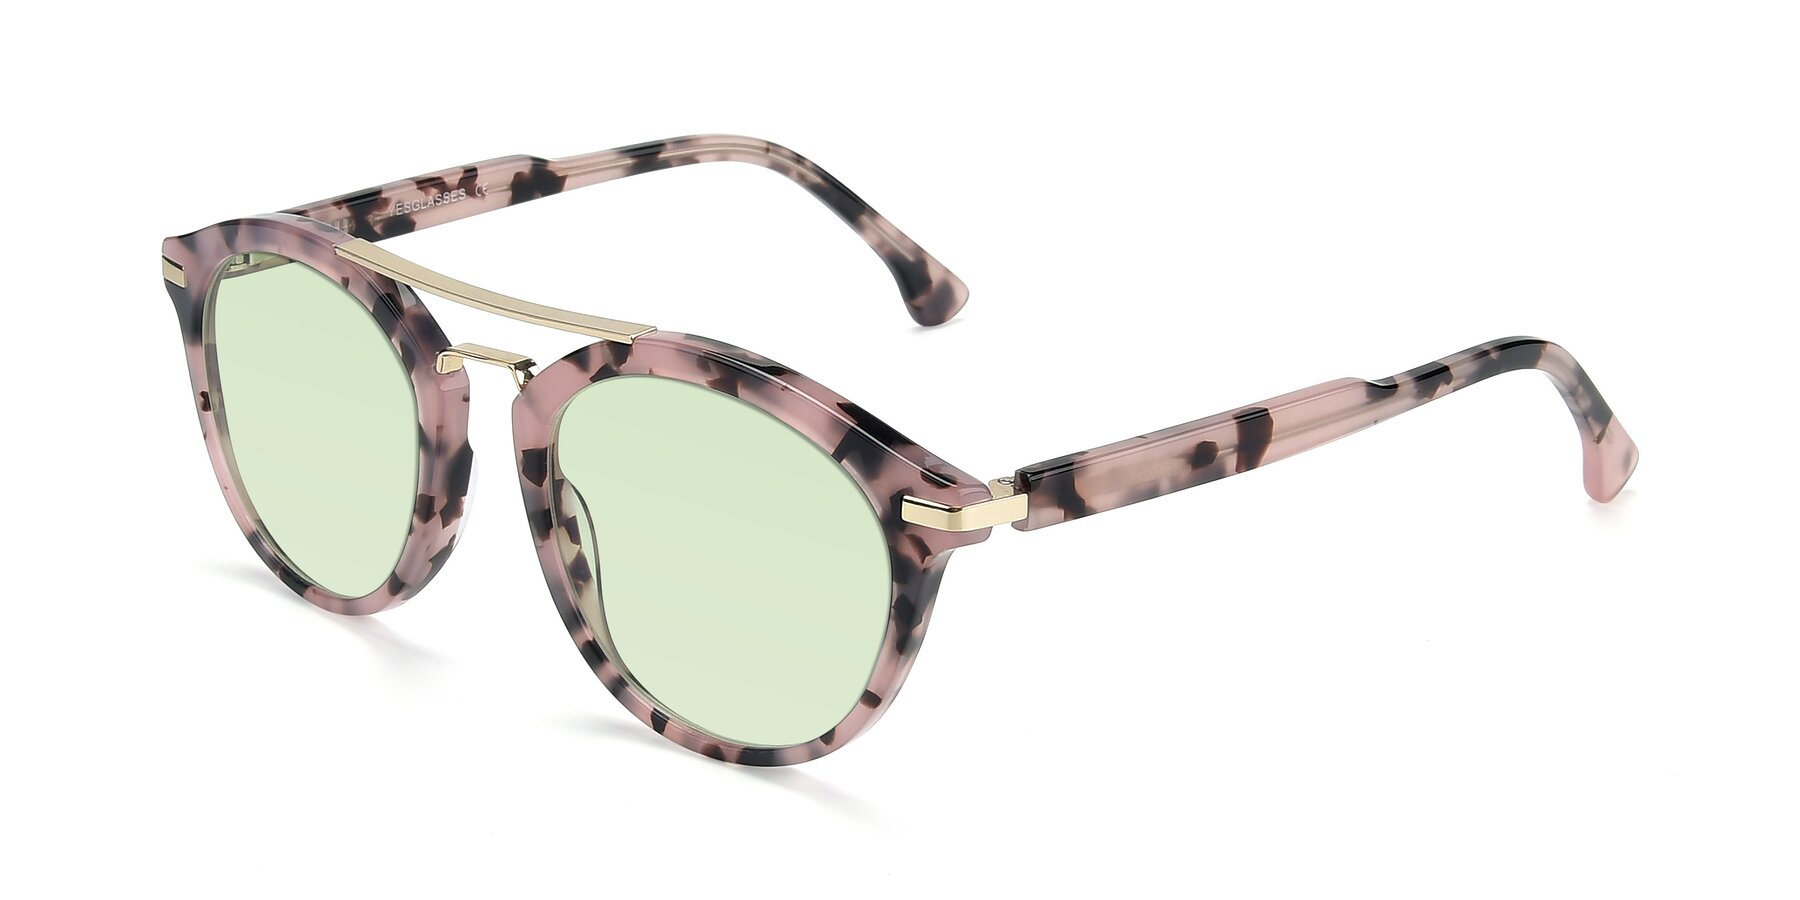 Angle of 17236 in Havana Floral-Gold with Light Green Tinted Lenses